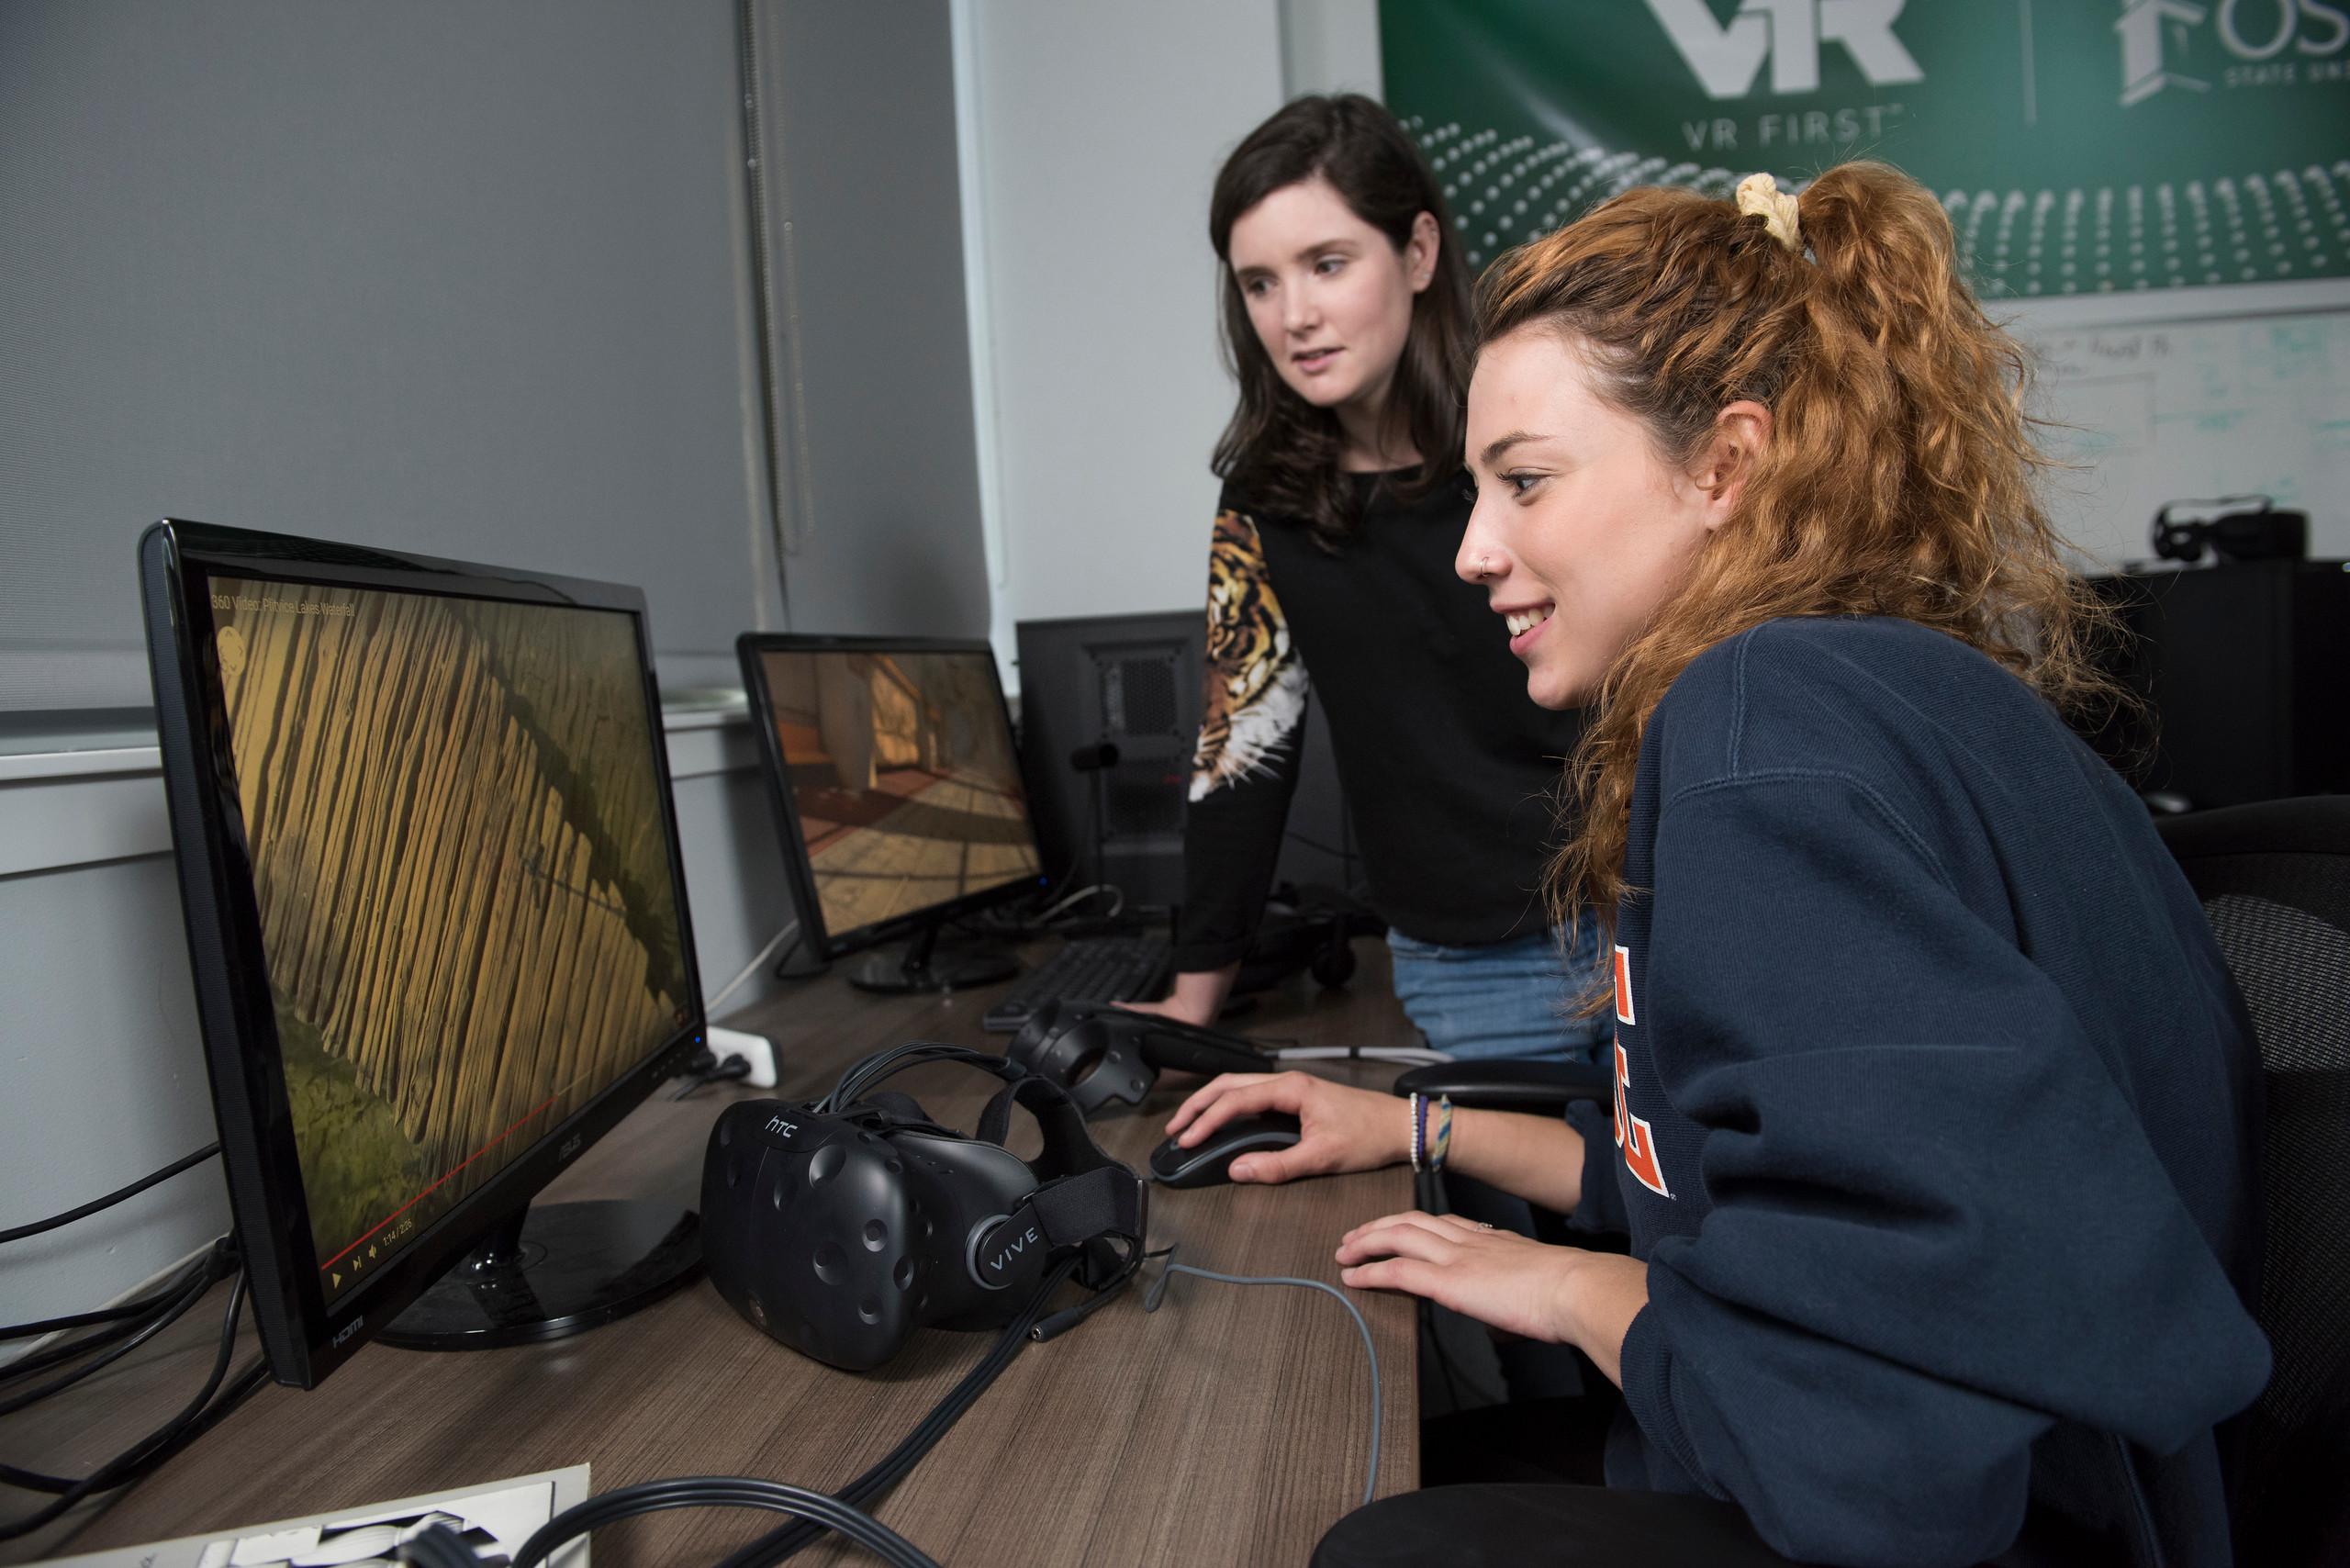 Students work on a human-computer interaction project